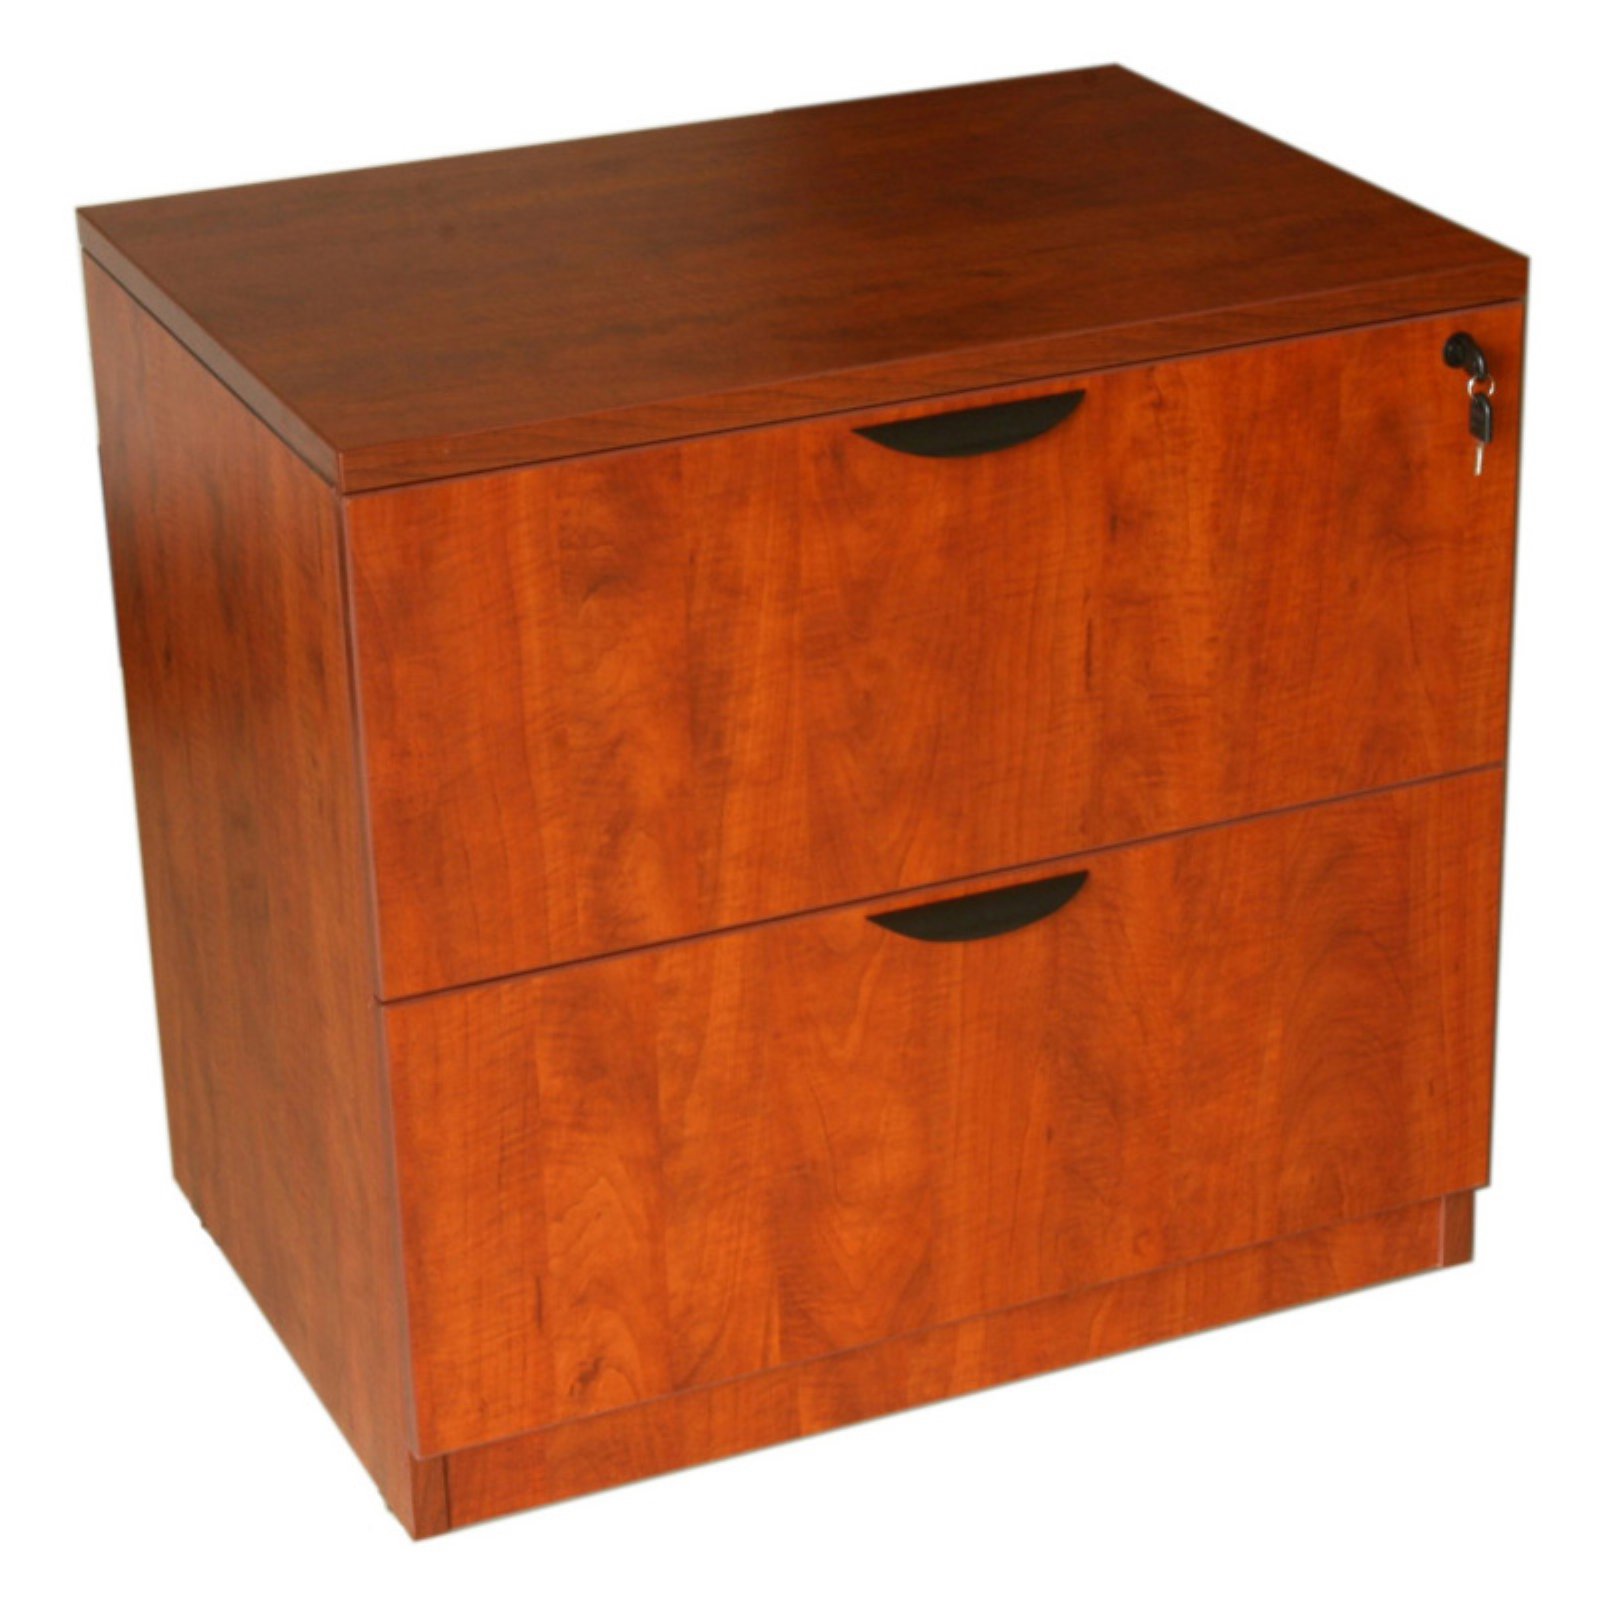 Boss N112-C 2-drawer Lateral File - Cherry - image 1 of 4